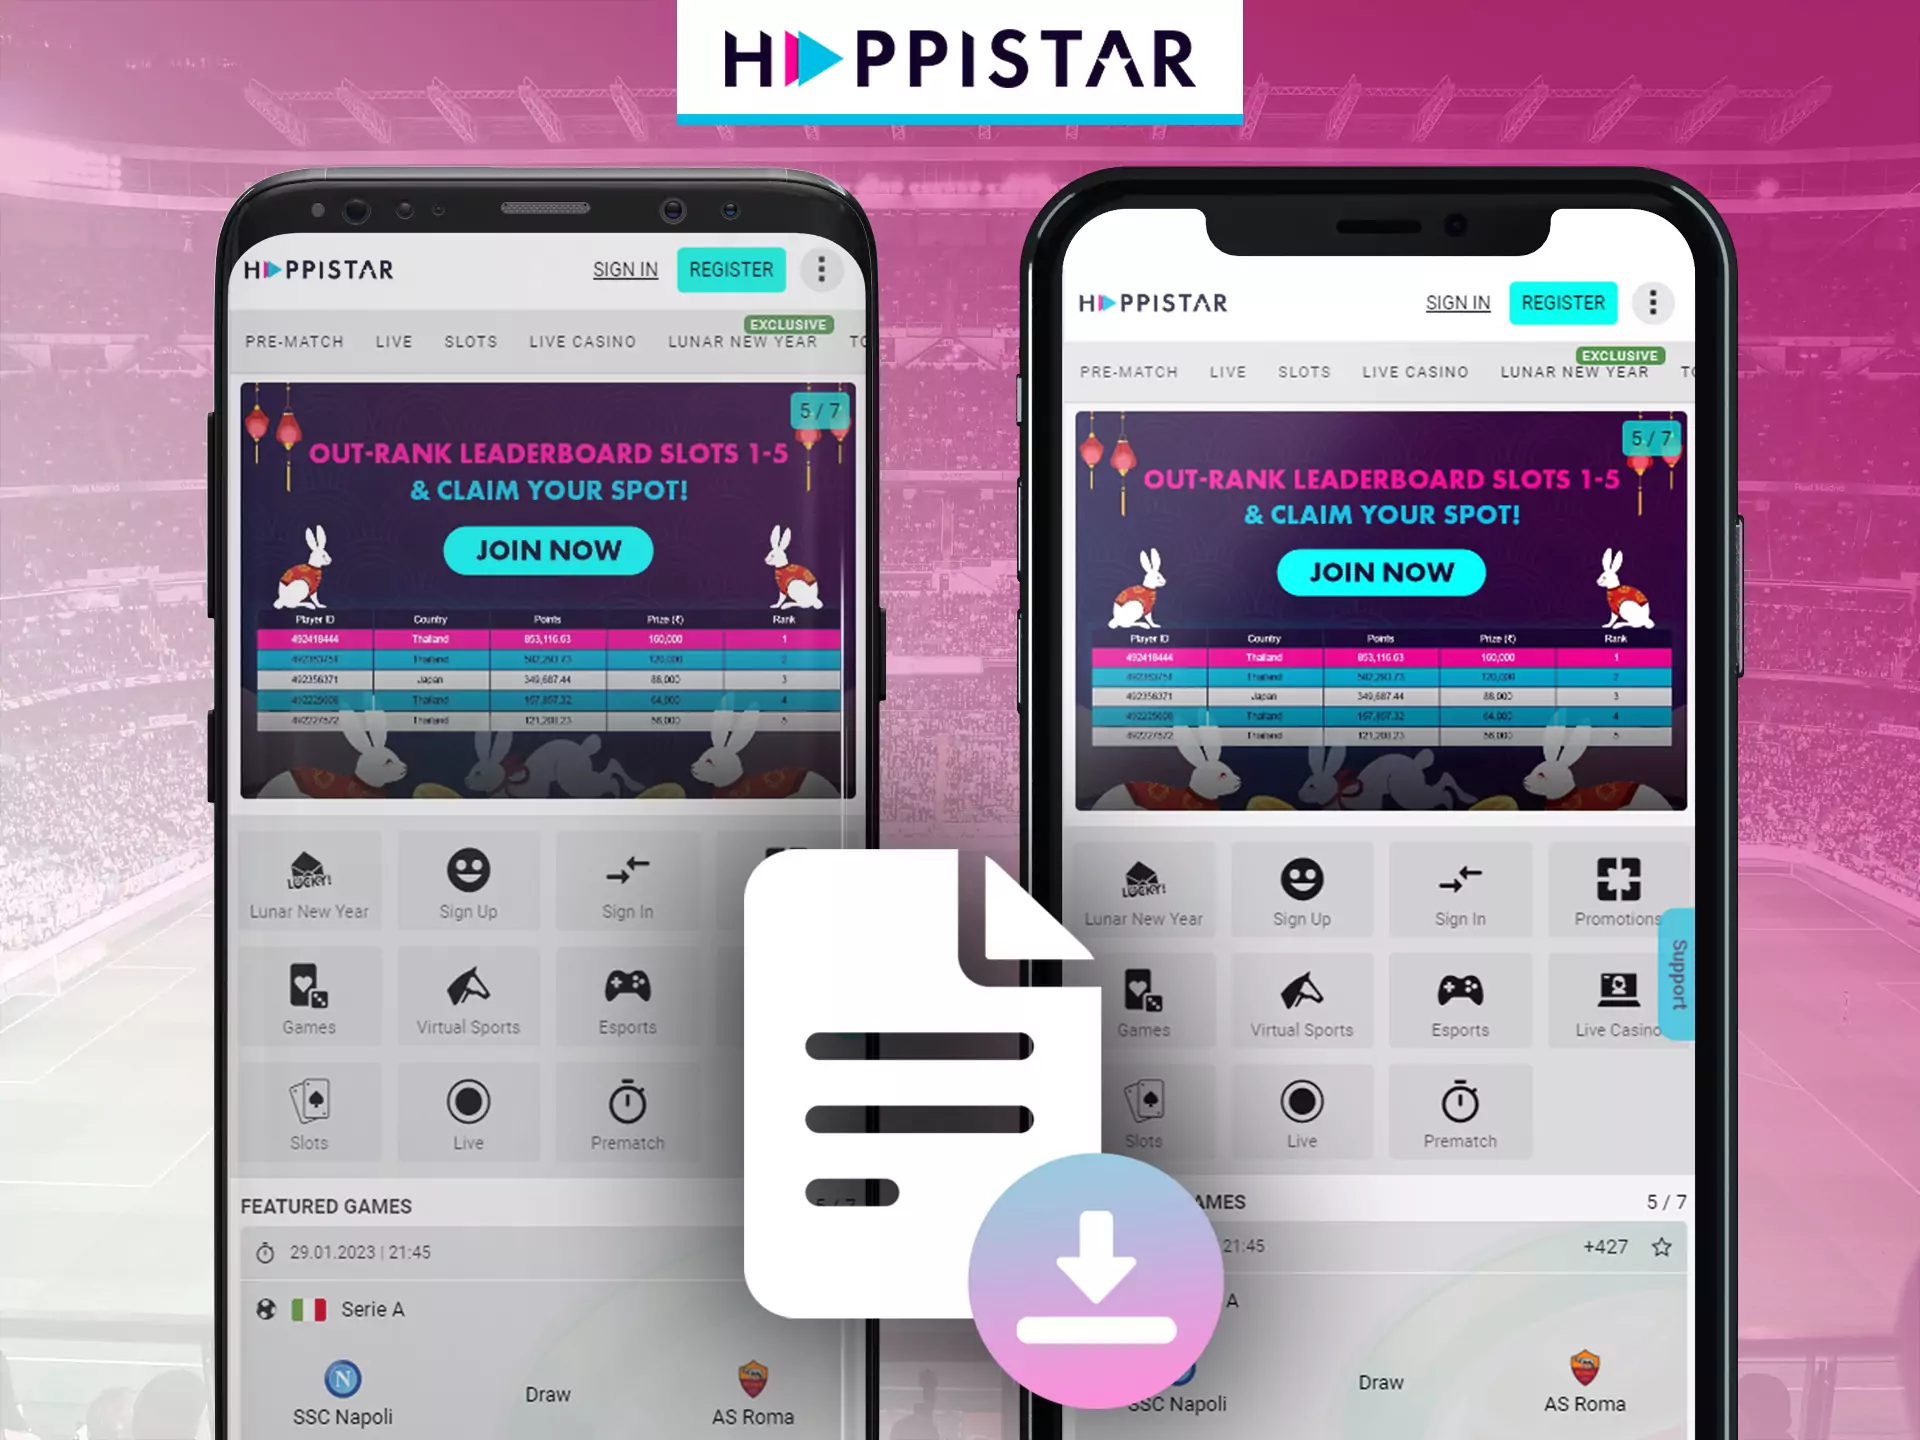 Unfortunately, there is no Happistar app yet.